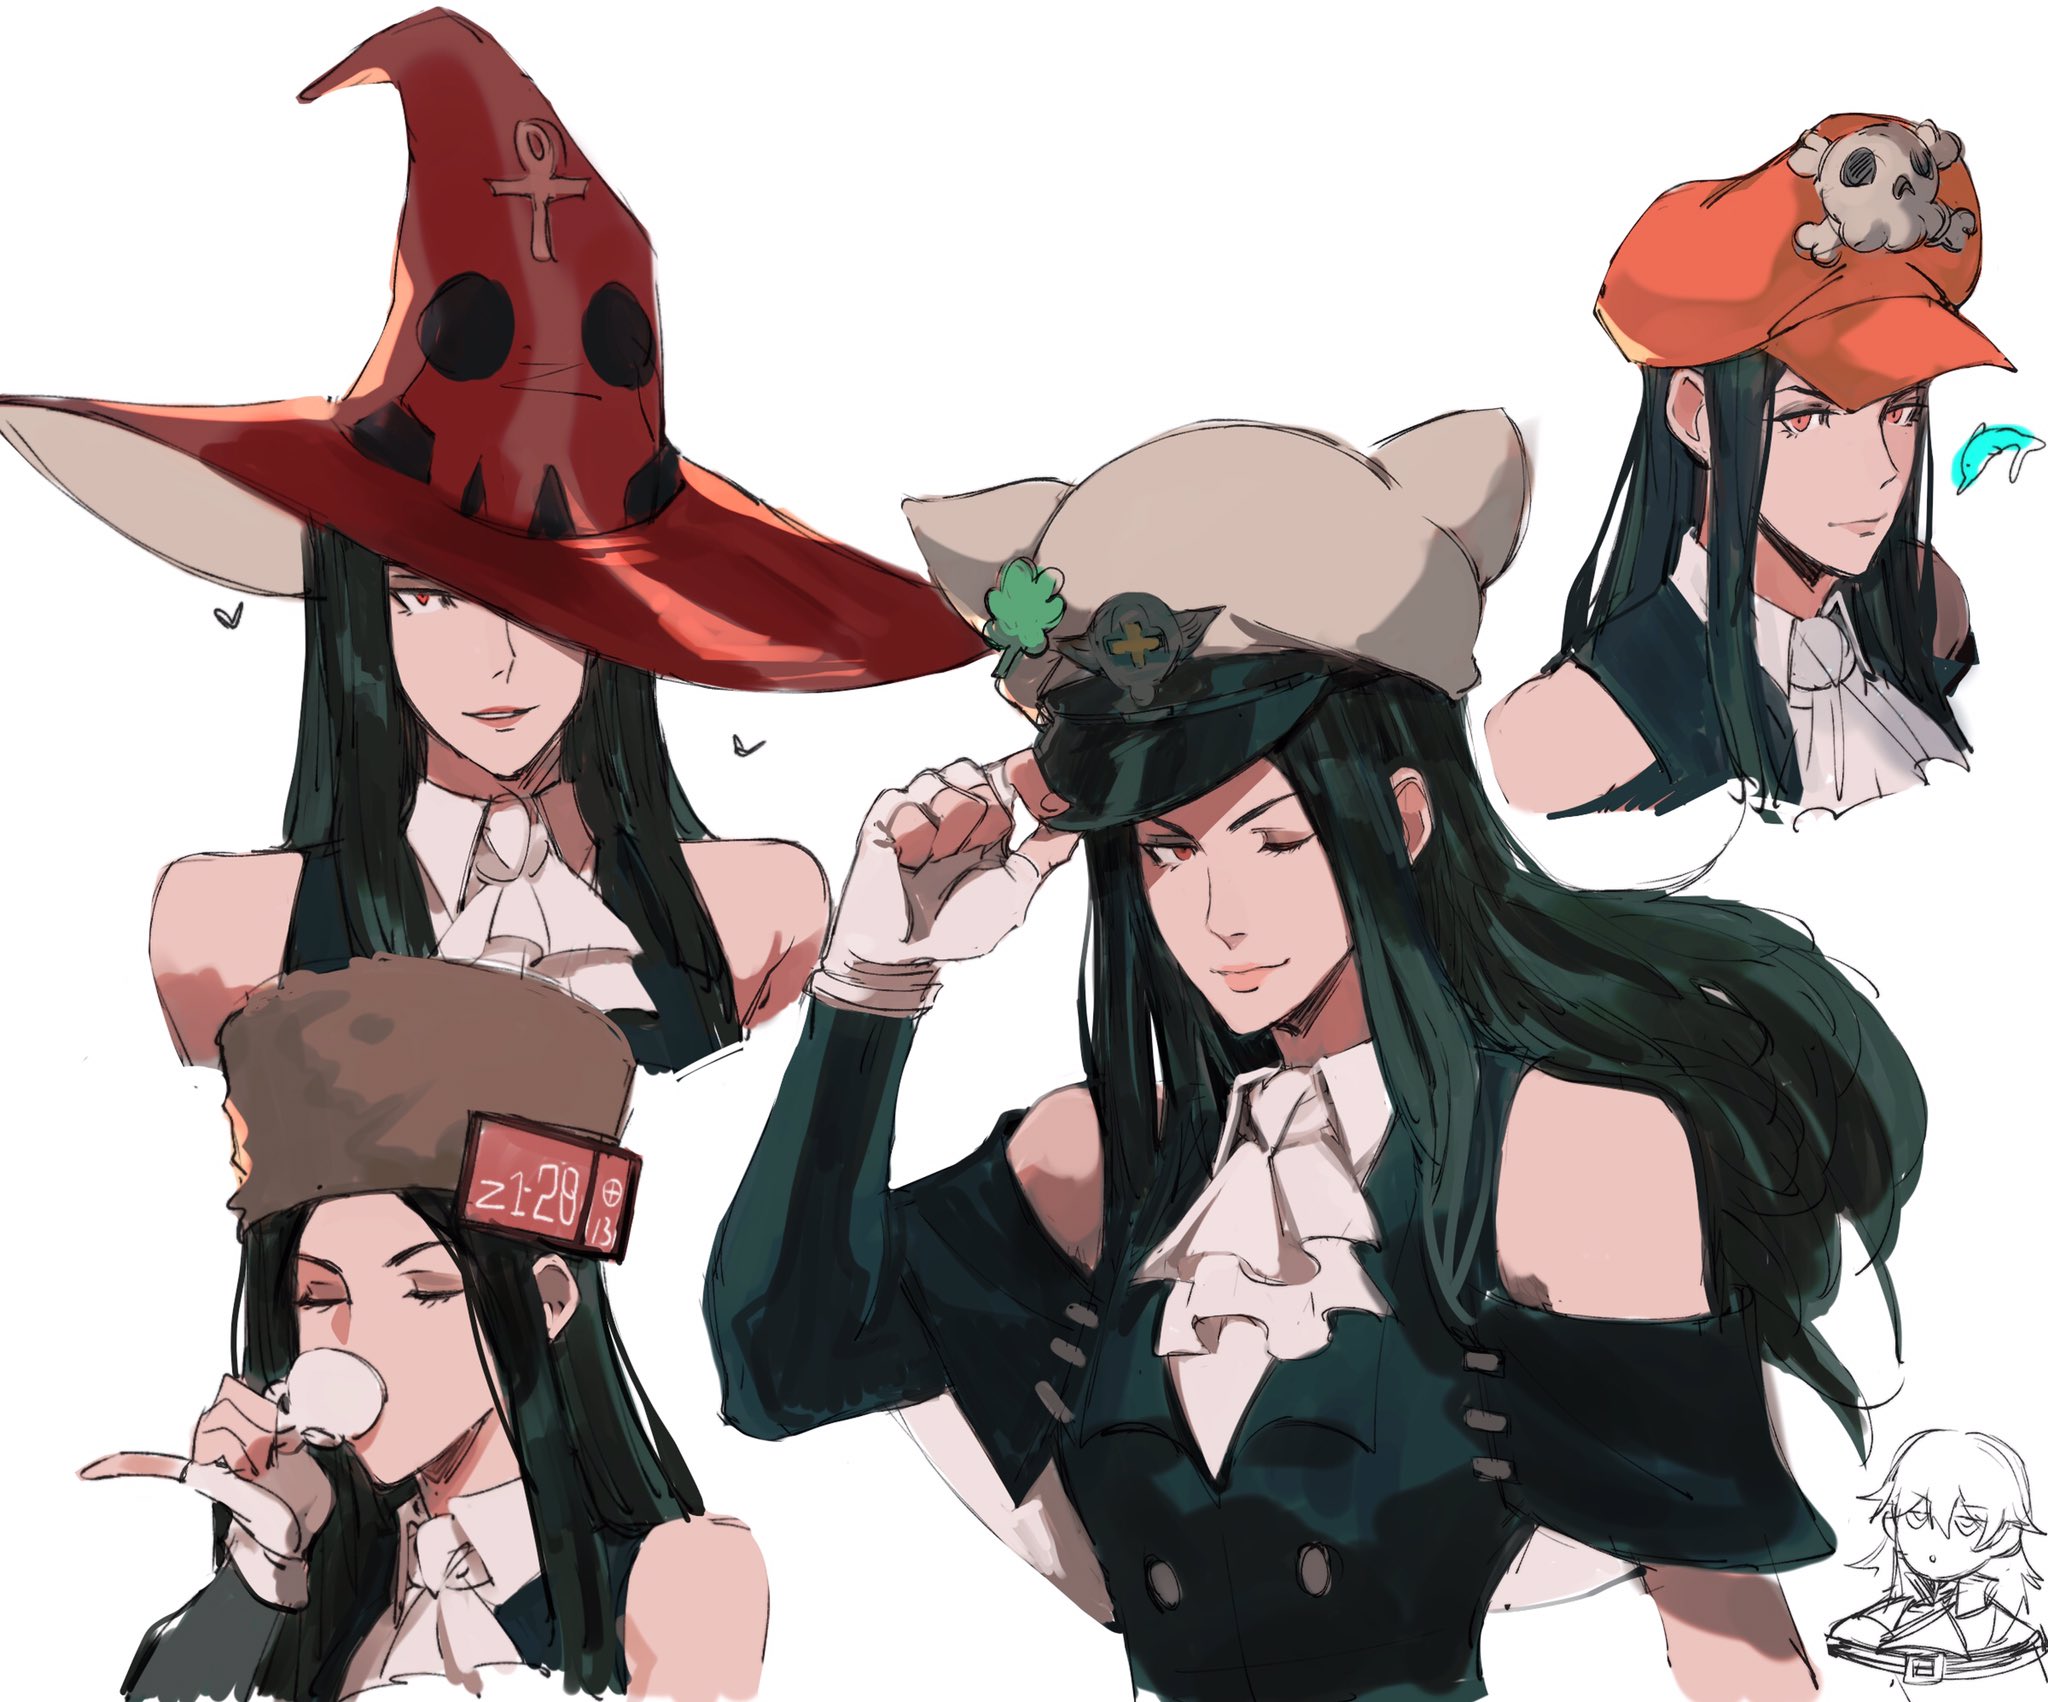 Anime 2048x1702 Guilty Gear Guilty gear strive Testament (guilty gear) Millia Rage fighting games Ramlethal Valentine cup I-No (Guilty Gear) drinking anime girls long hair one eye closed witch hat hat women with hats white background smiling